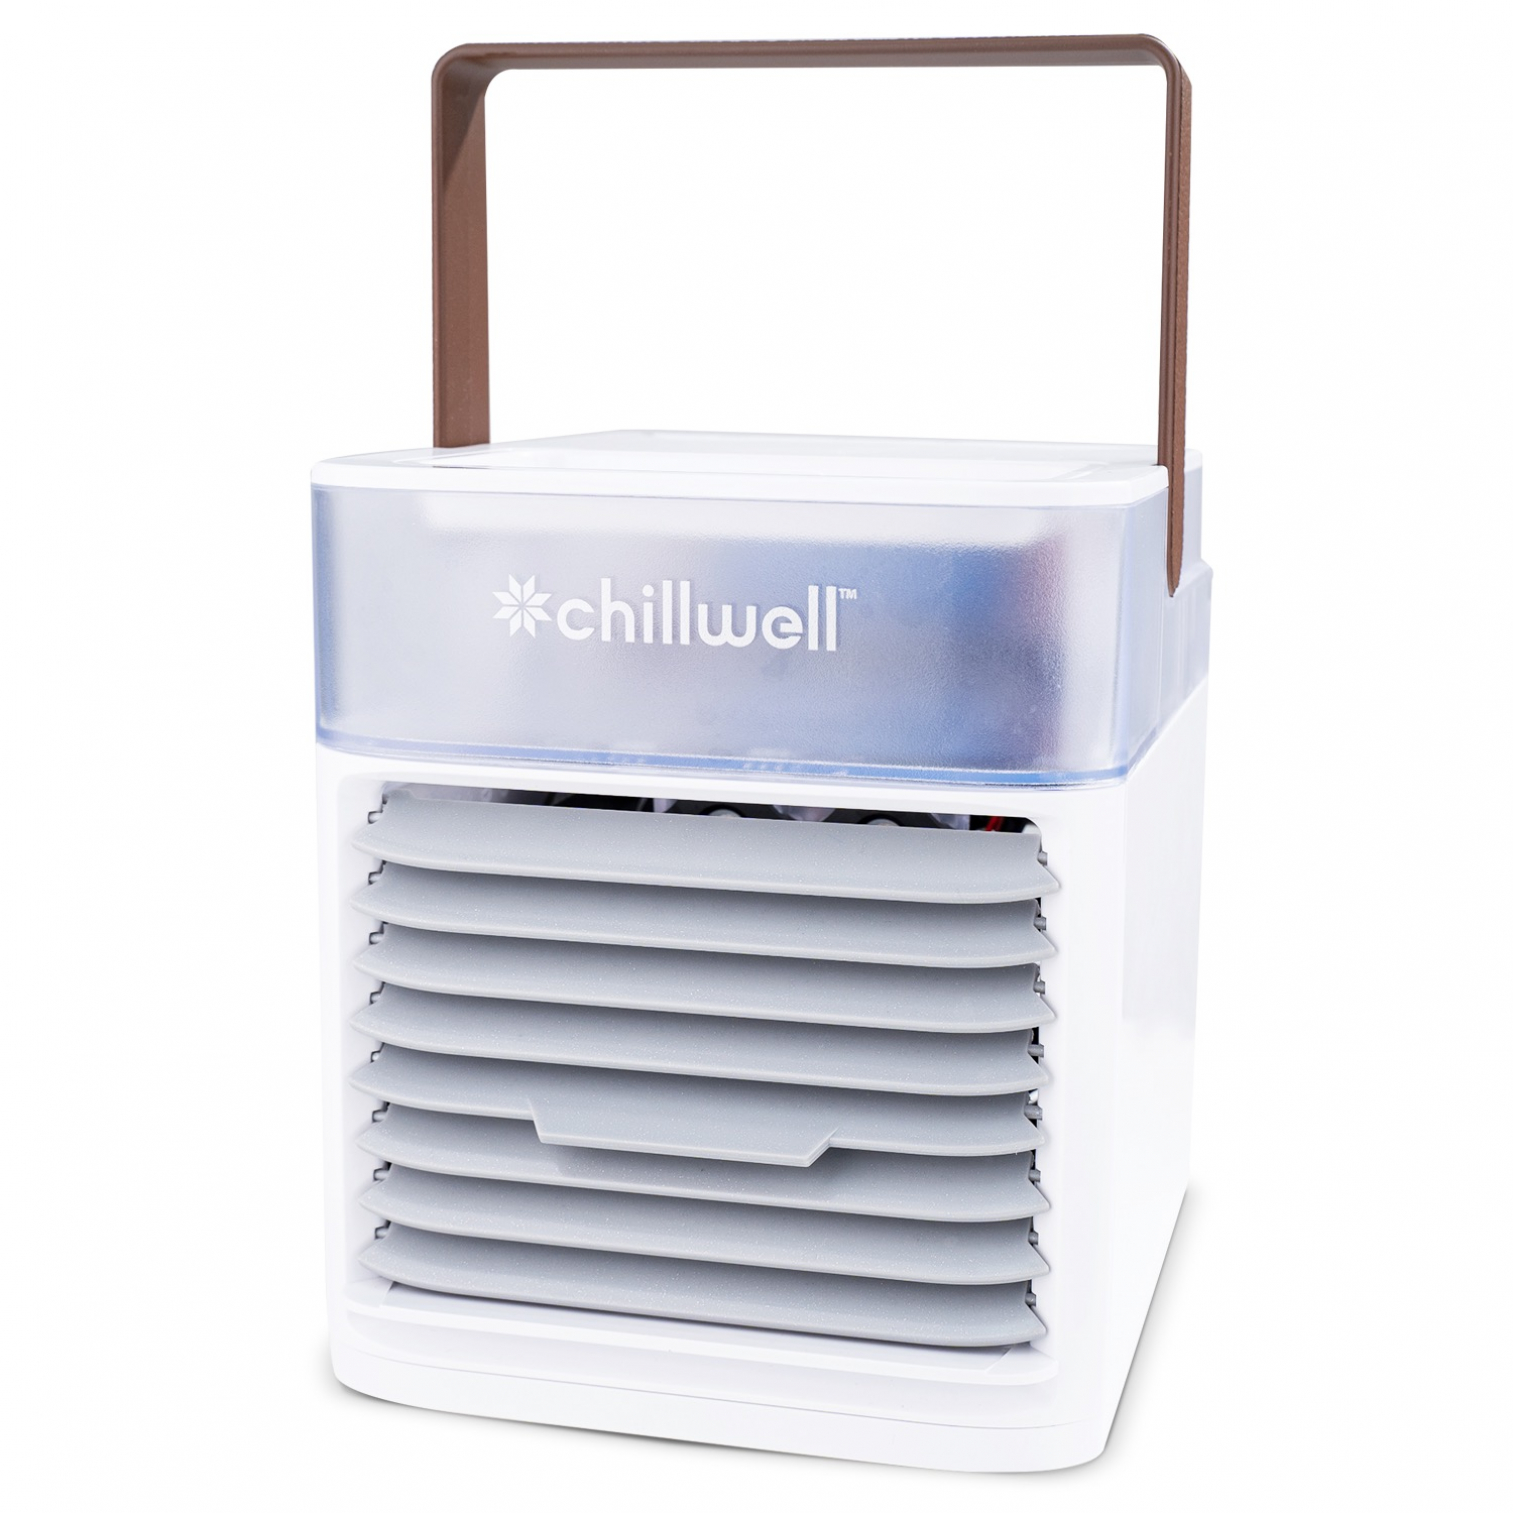 Chillwell AC Promotion Code